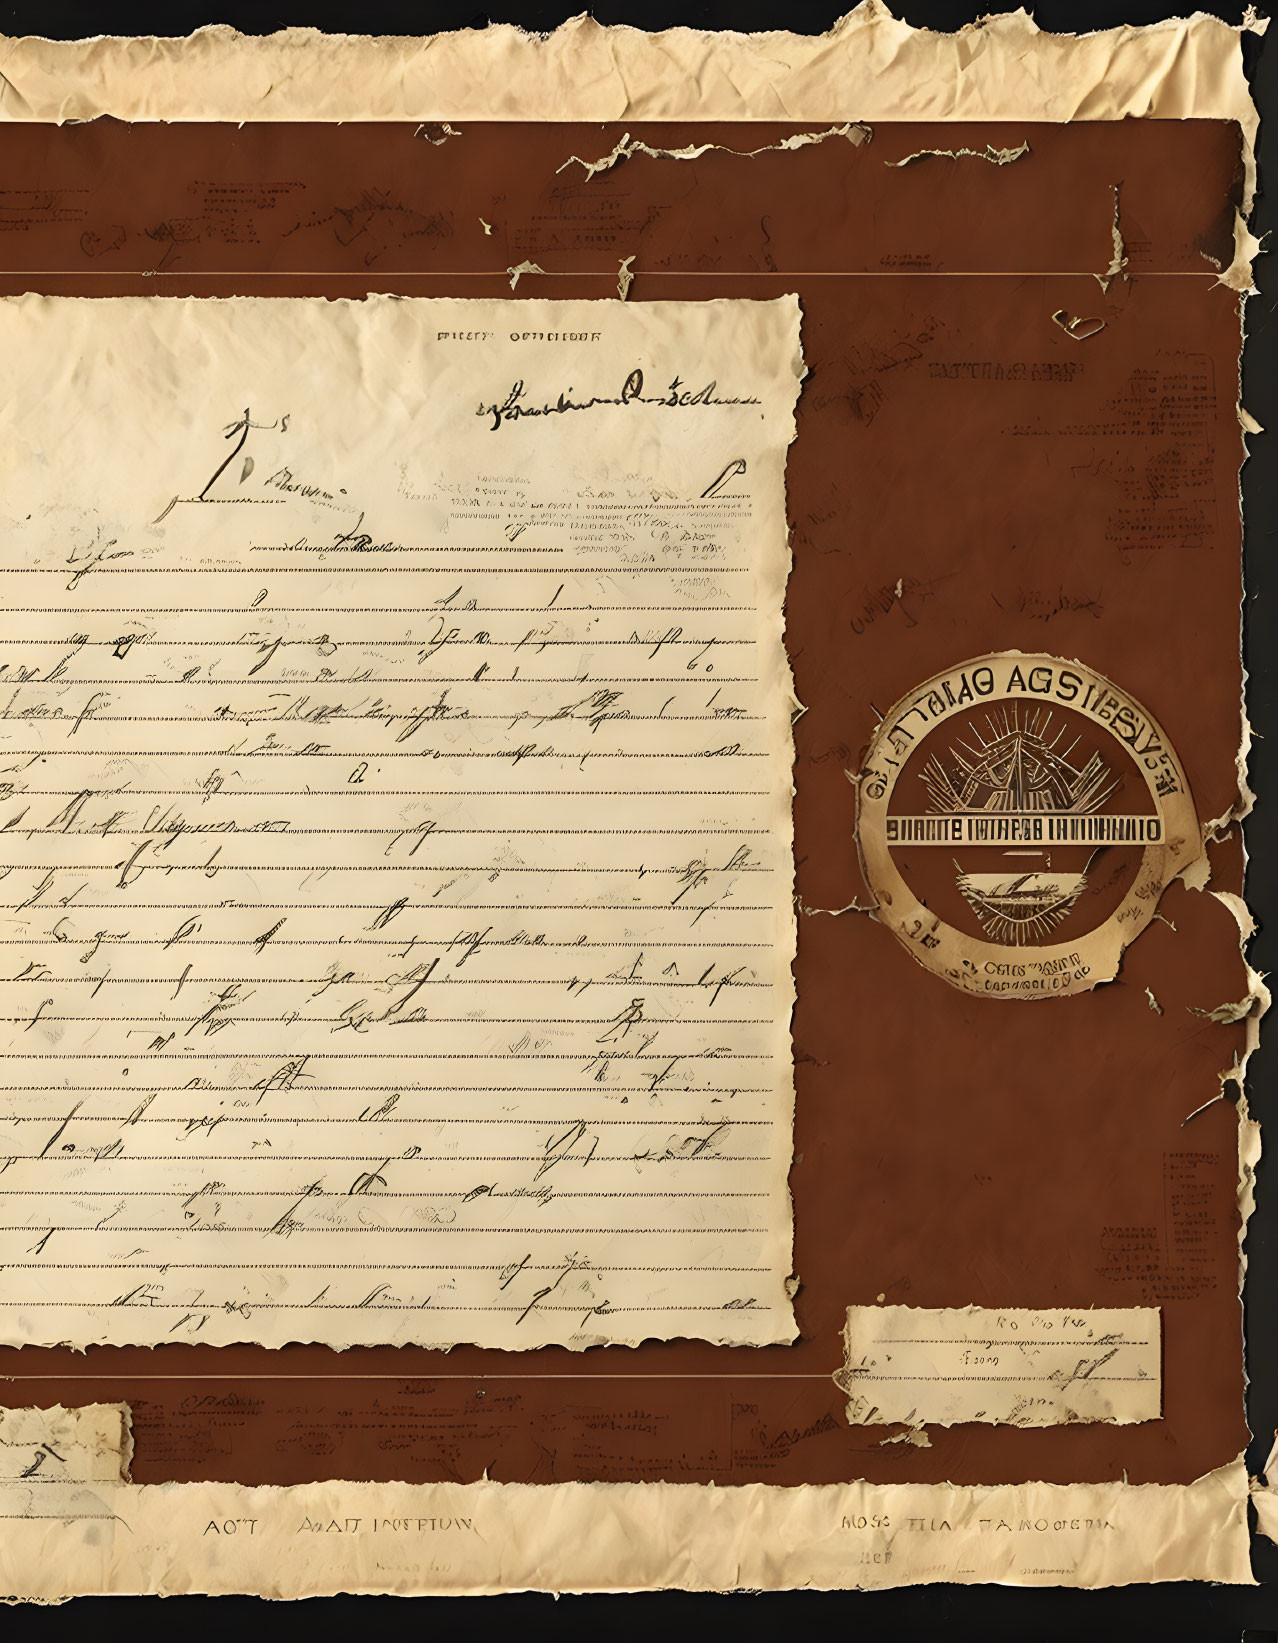 Aged historical document with cursive writing, seals, tears, and burn marks